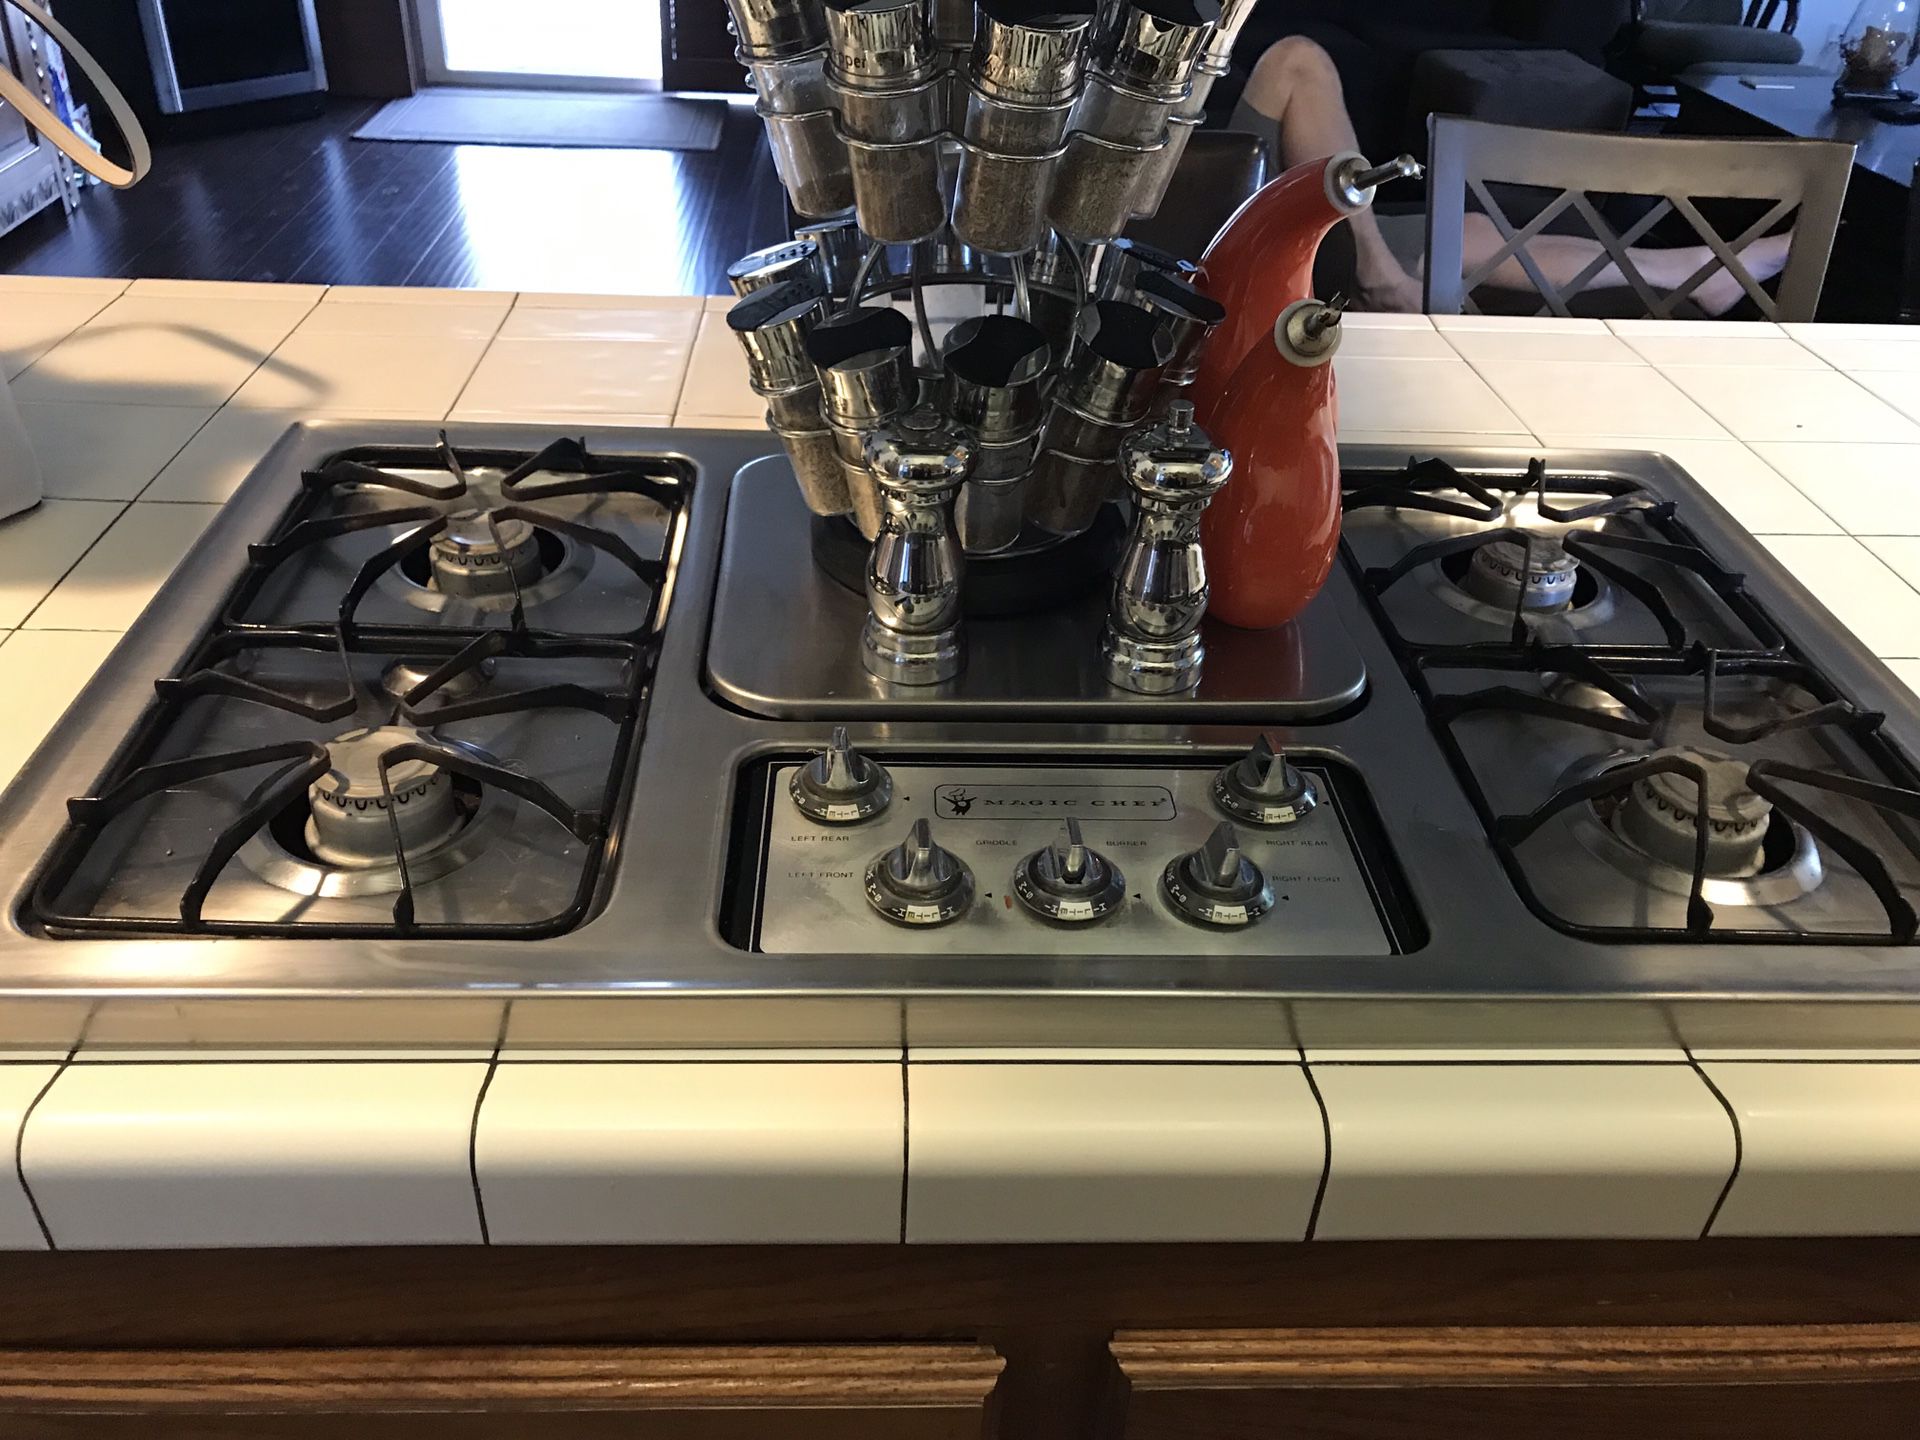 36 inch Magic Chef GAS cooktop (used) works great - pick up in Rancho Cucamonga CA